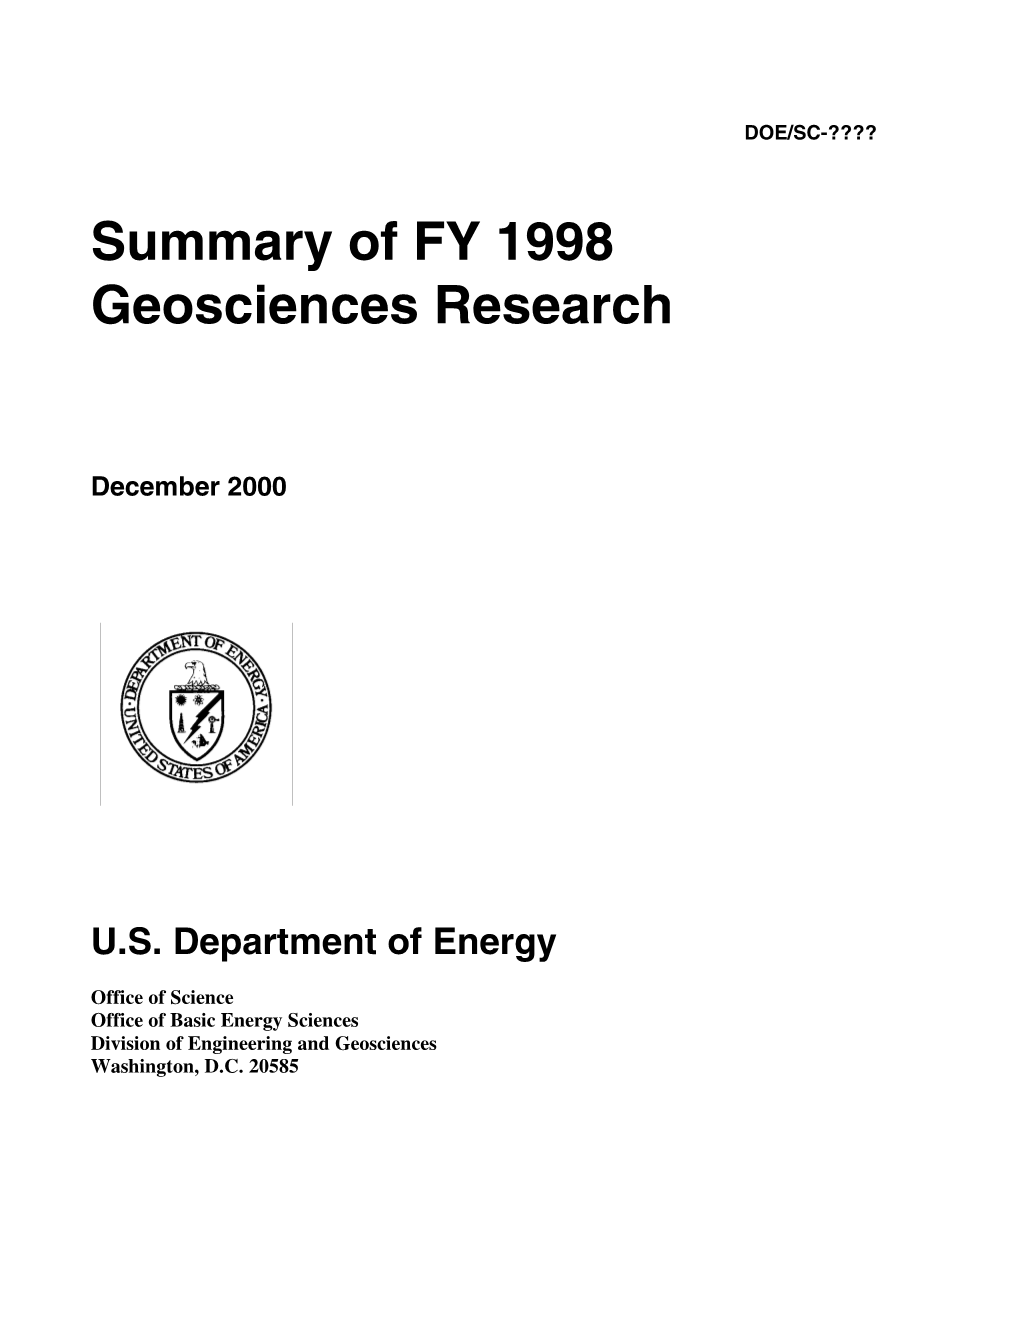 Summary of FY 1998 Geosciences Research